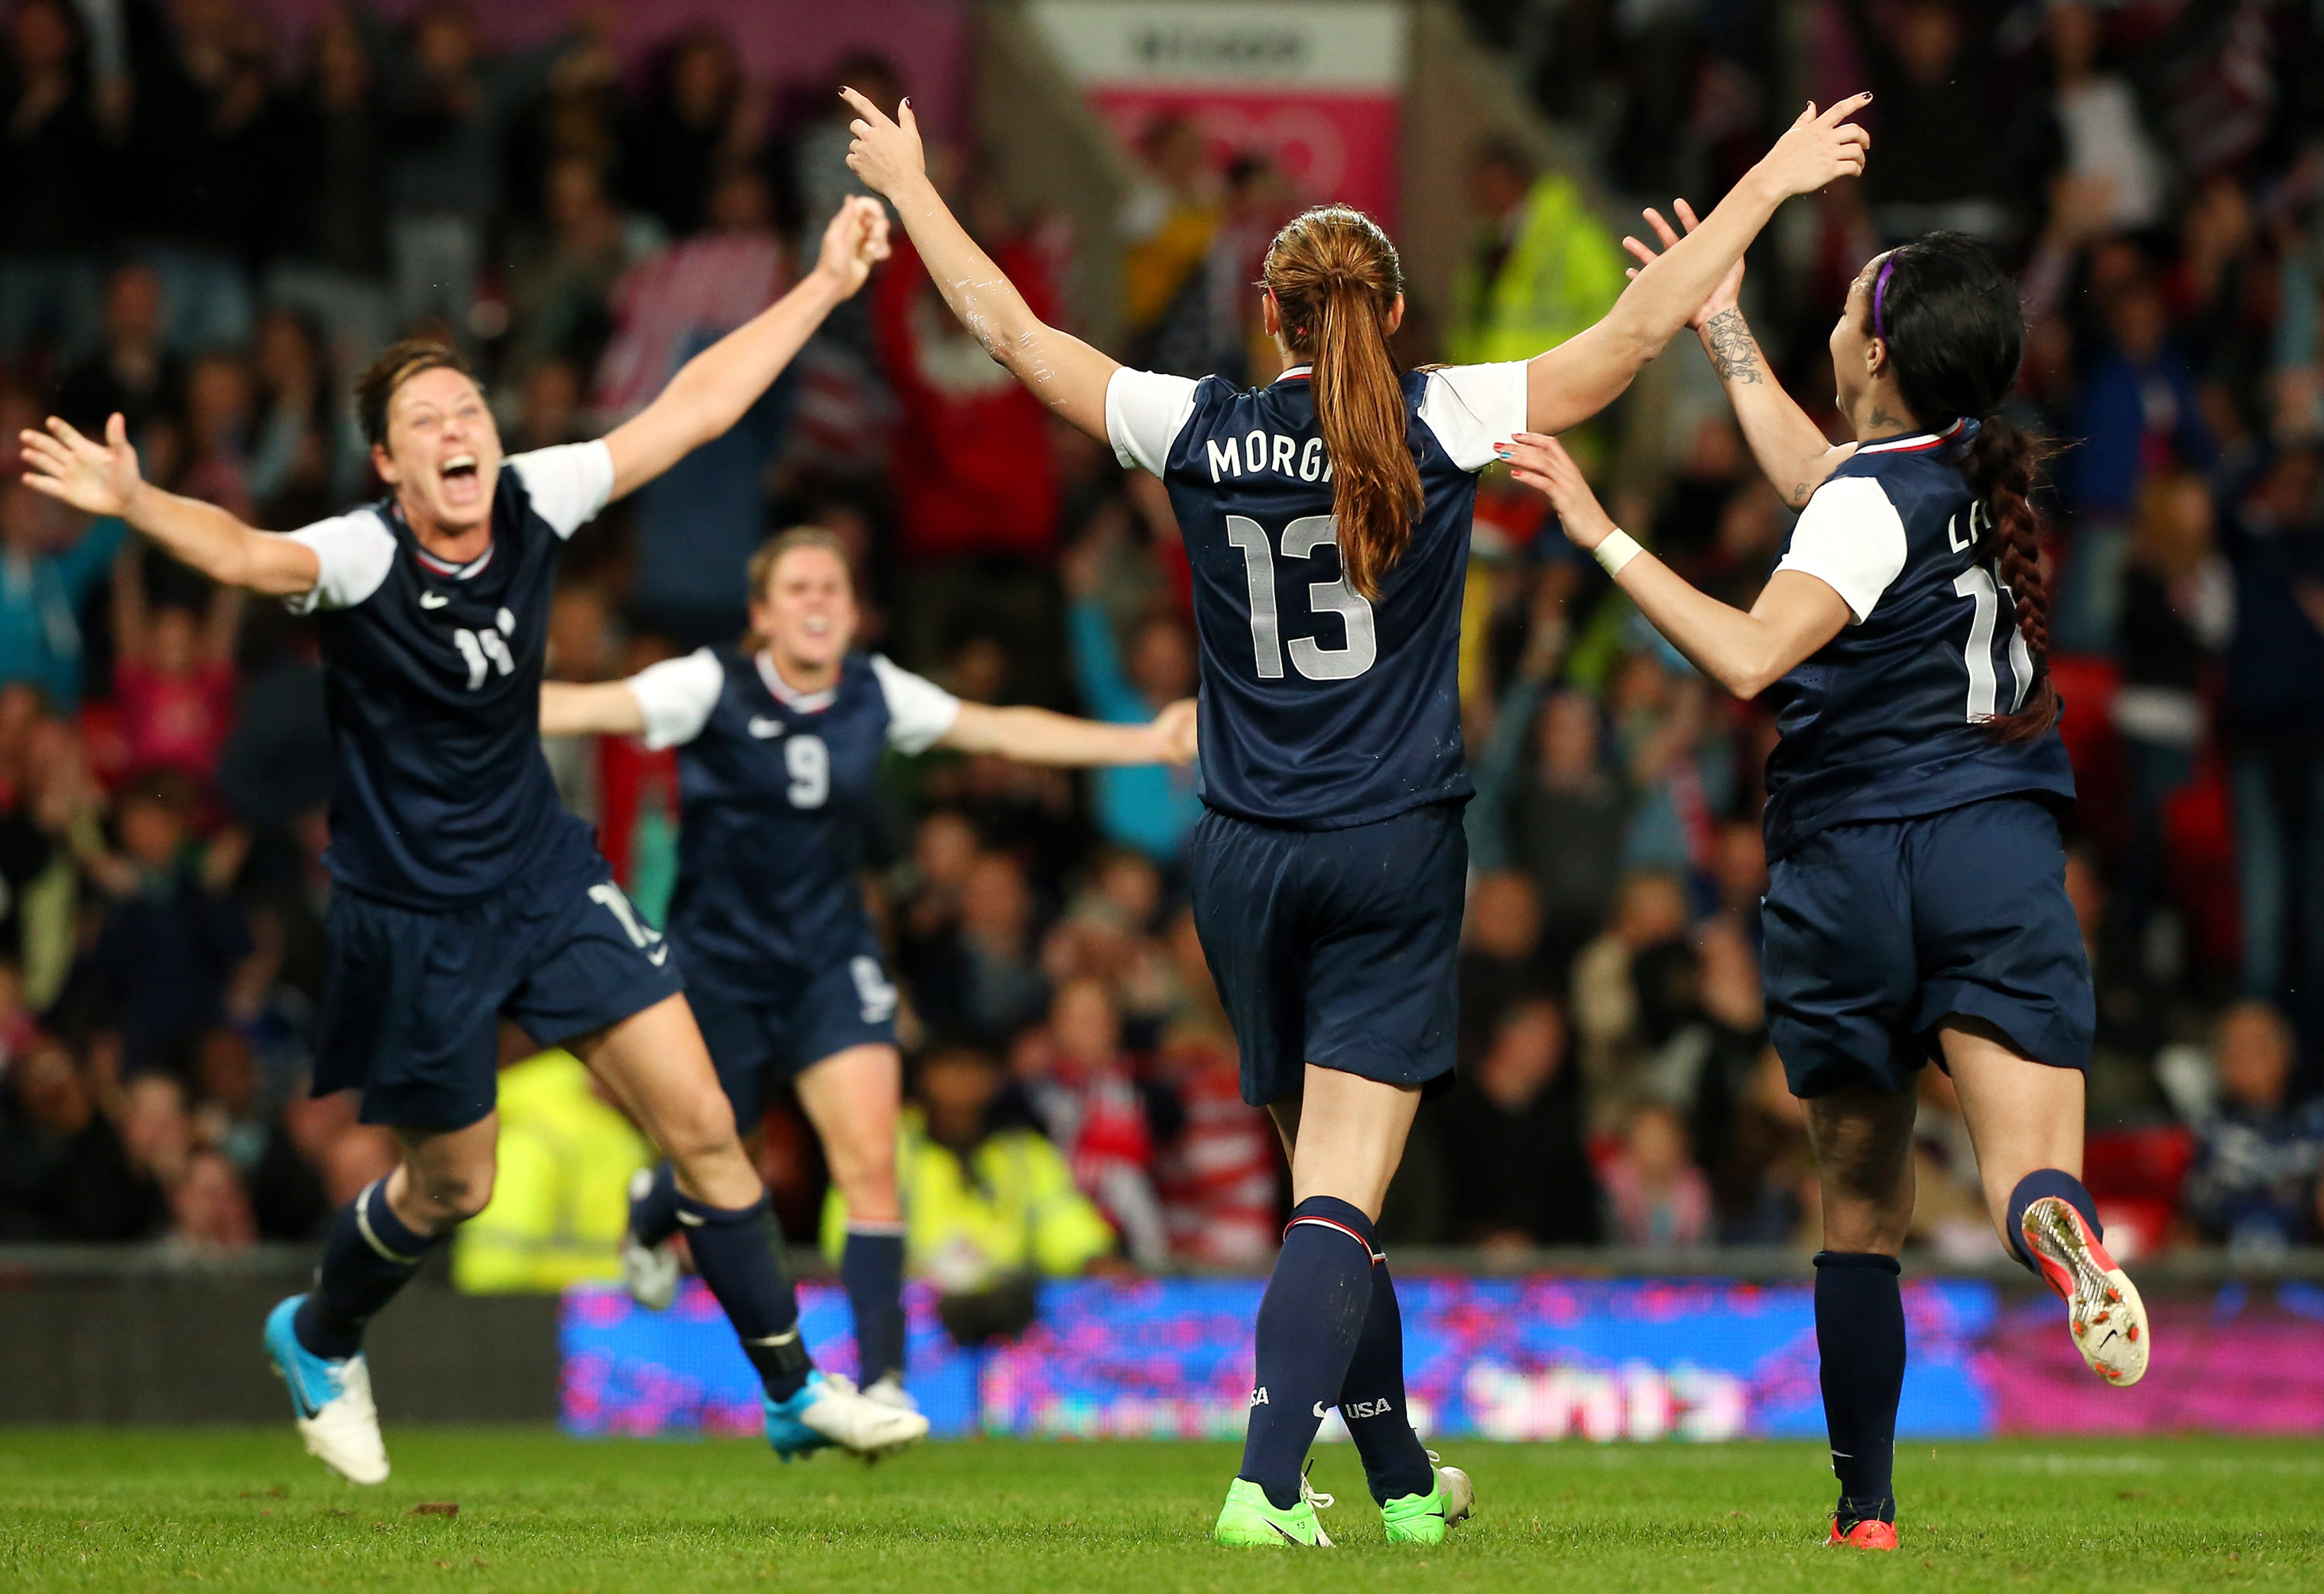 Morgan celebrating her legendary goal to beat Canada at the 2012 Olympics (Getty Images)